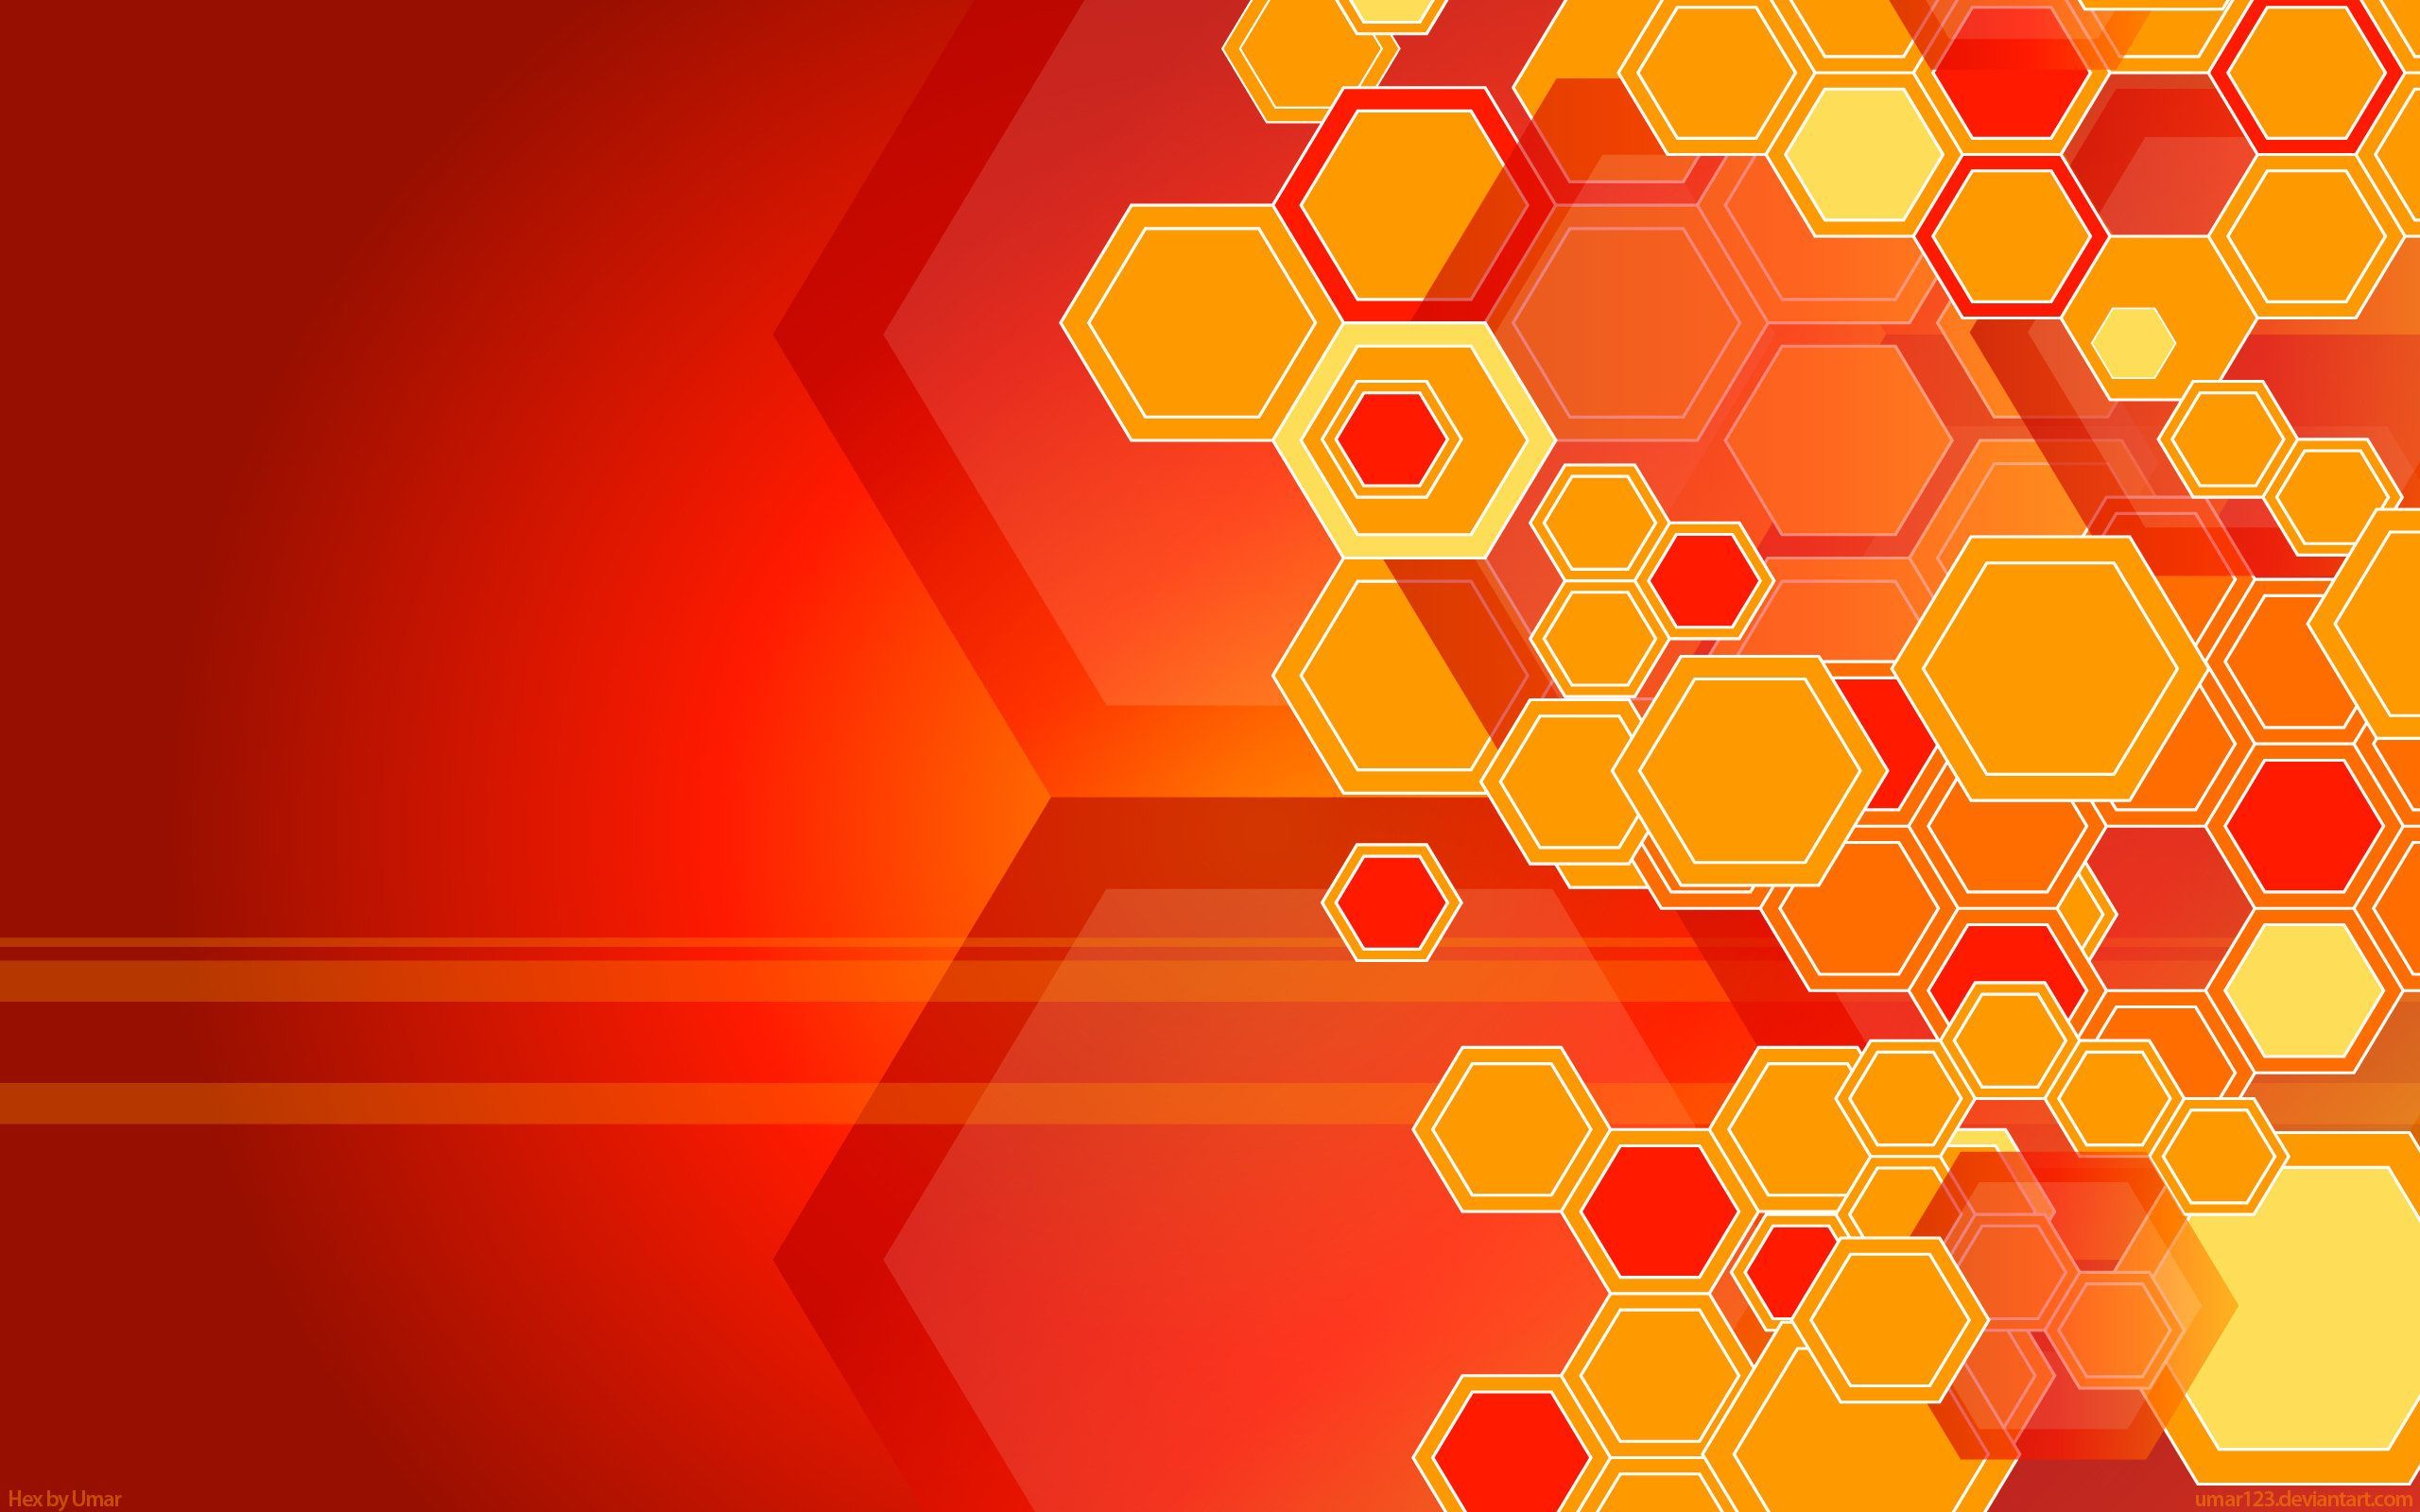 2560x1600 New Abstract Wallpaper With Hexagon Shape In Red And Yellow